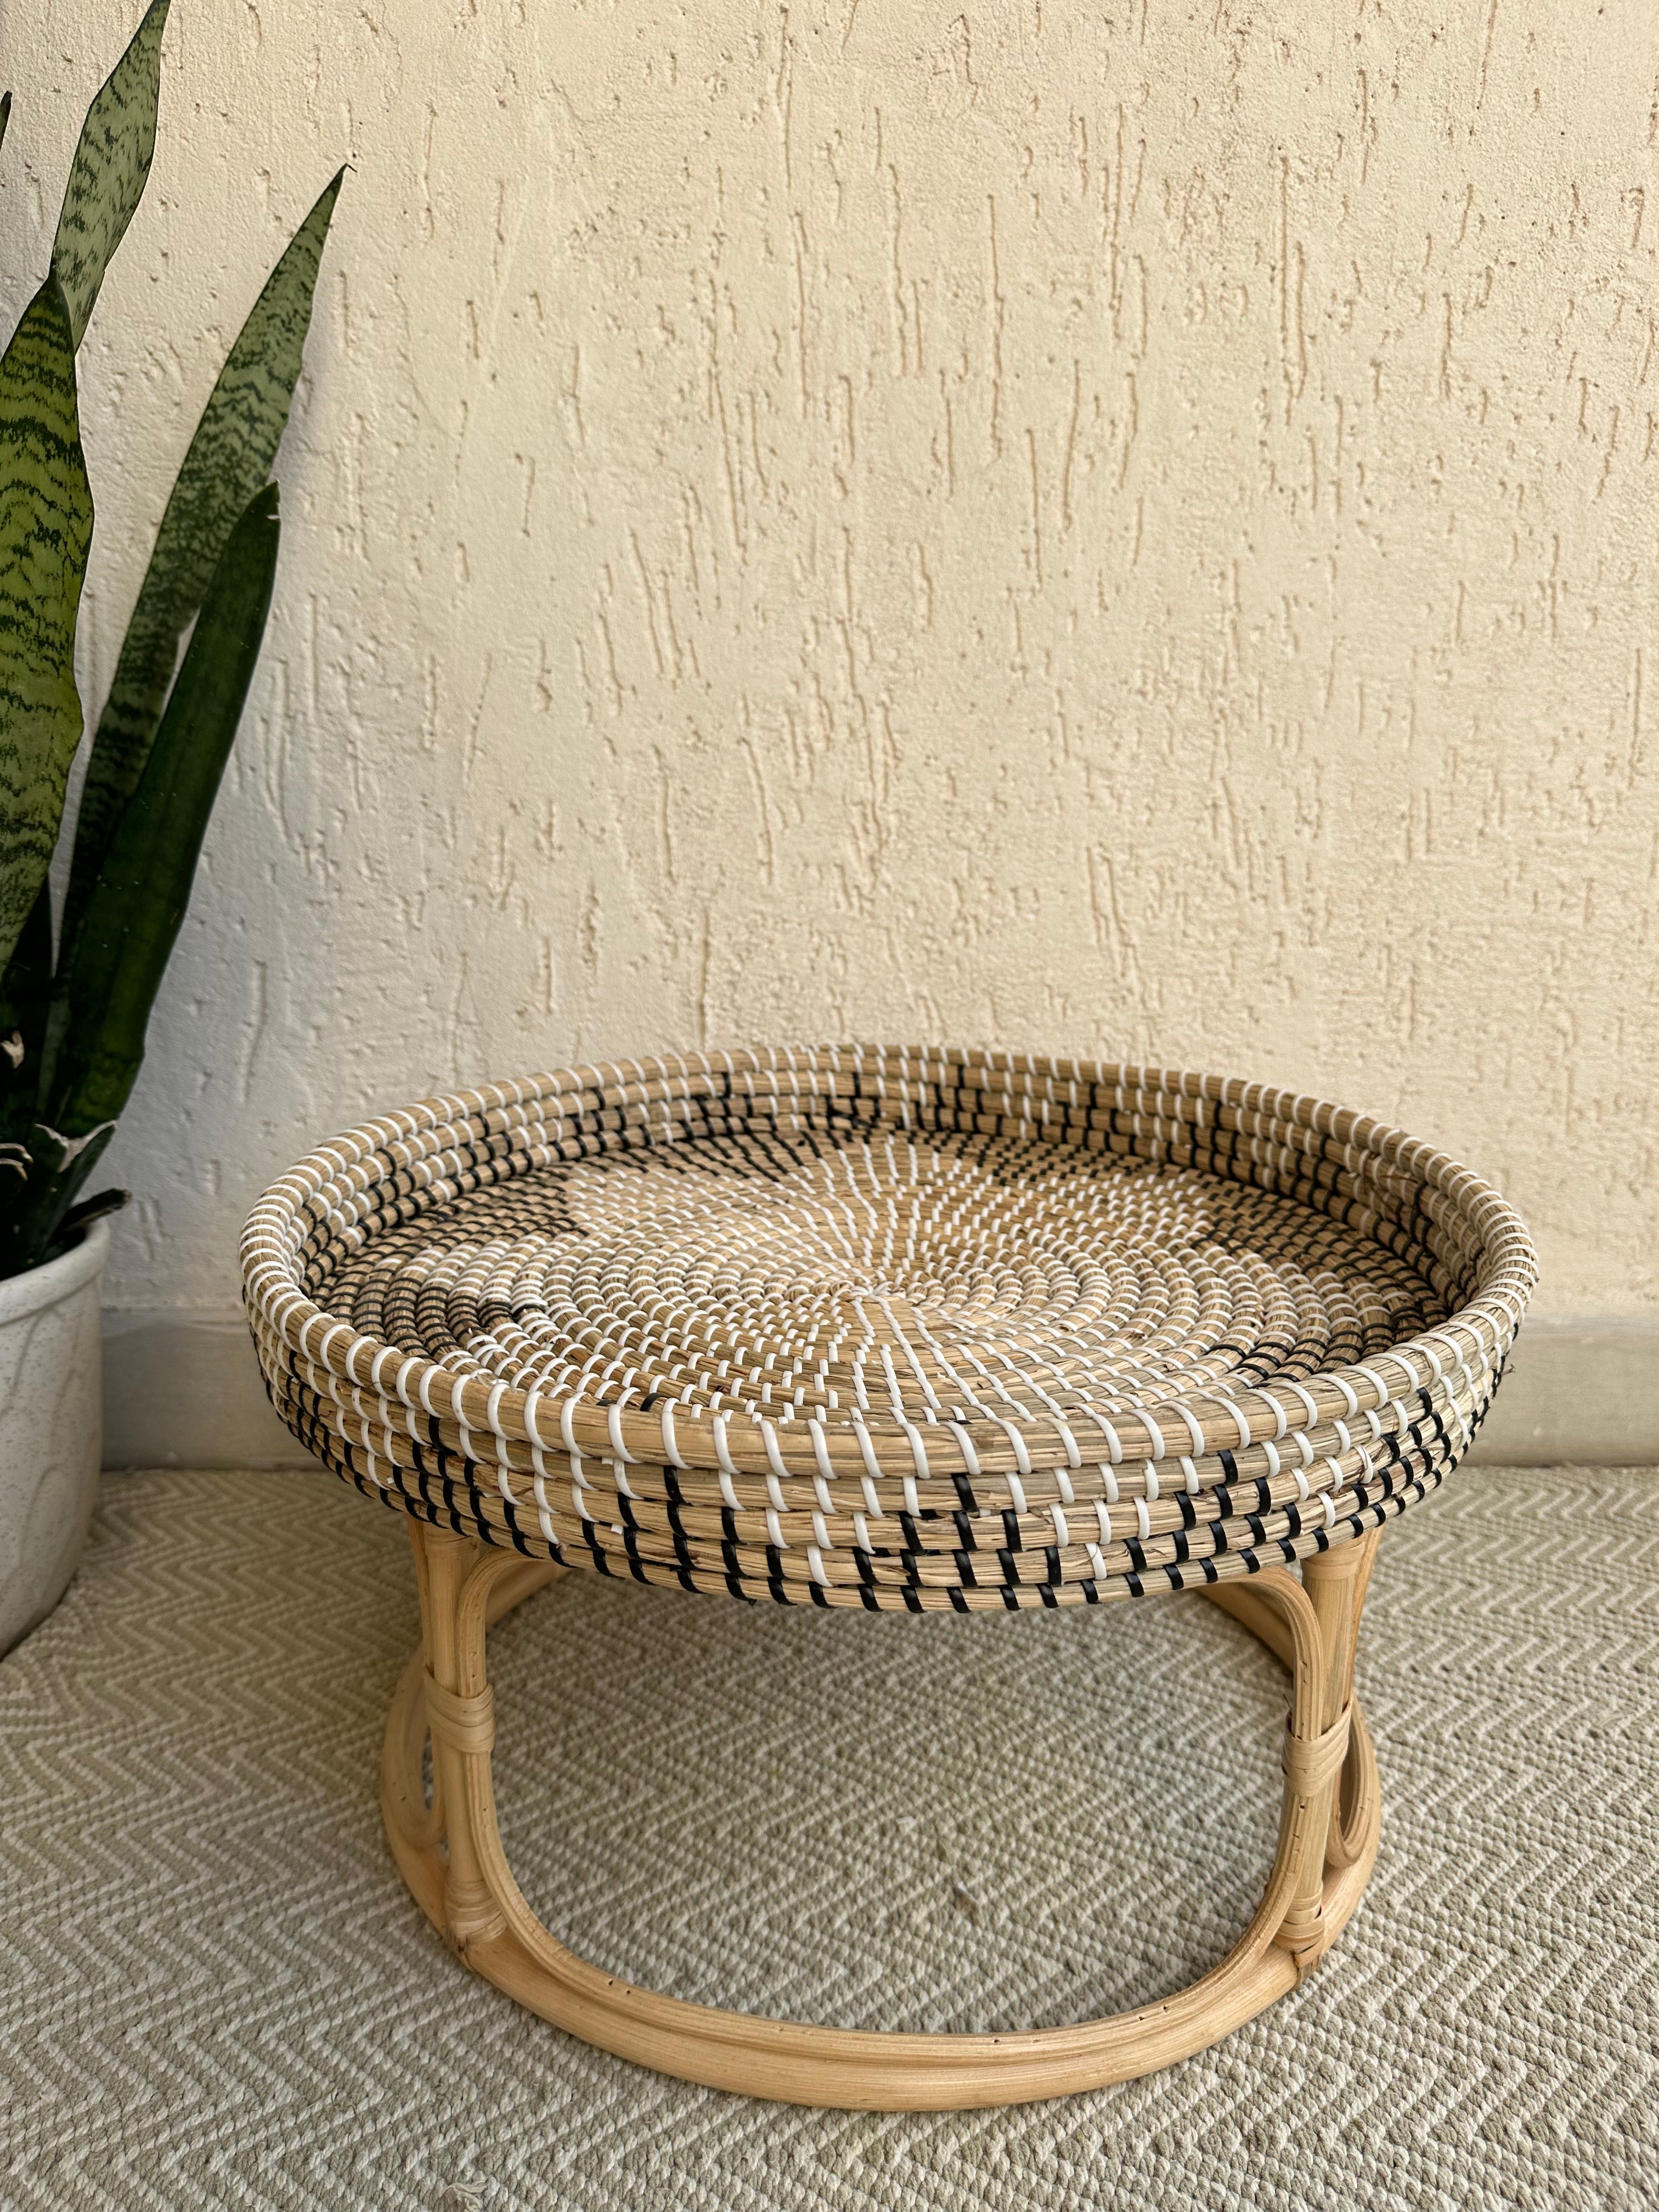 Seagrass and Rattan Round Table Tray